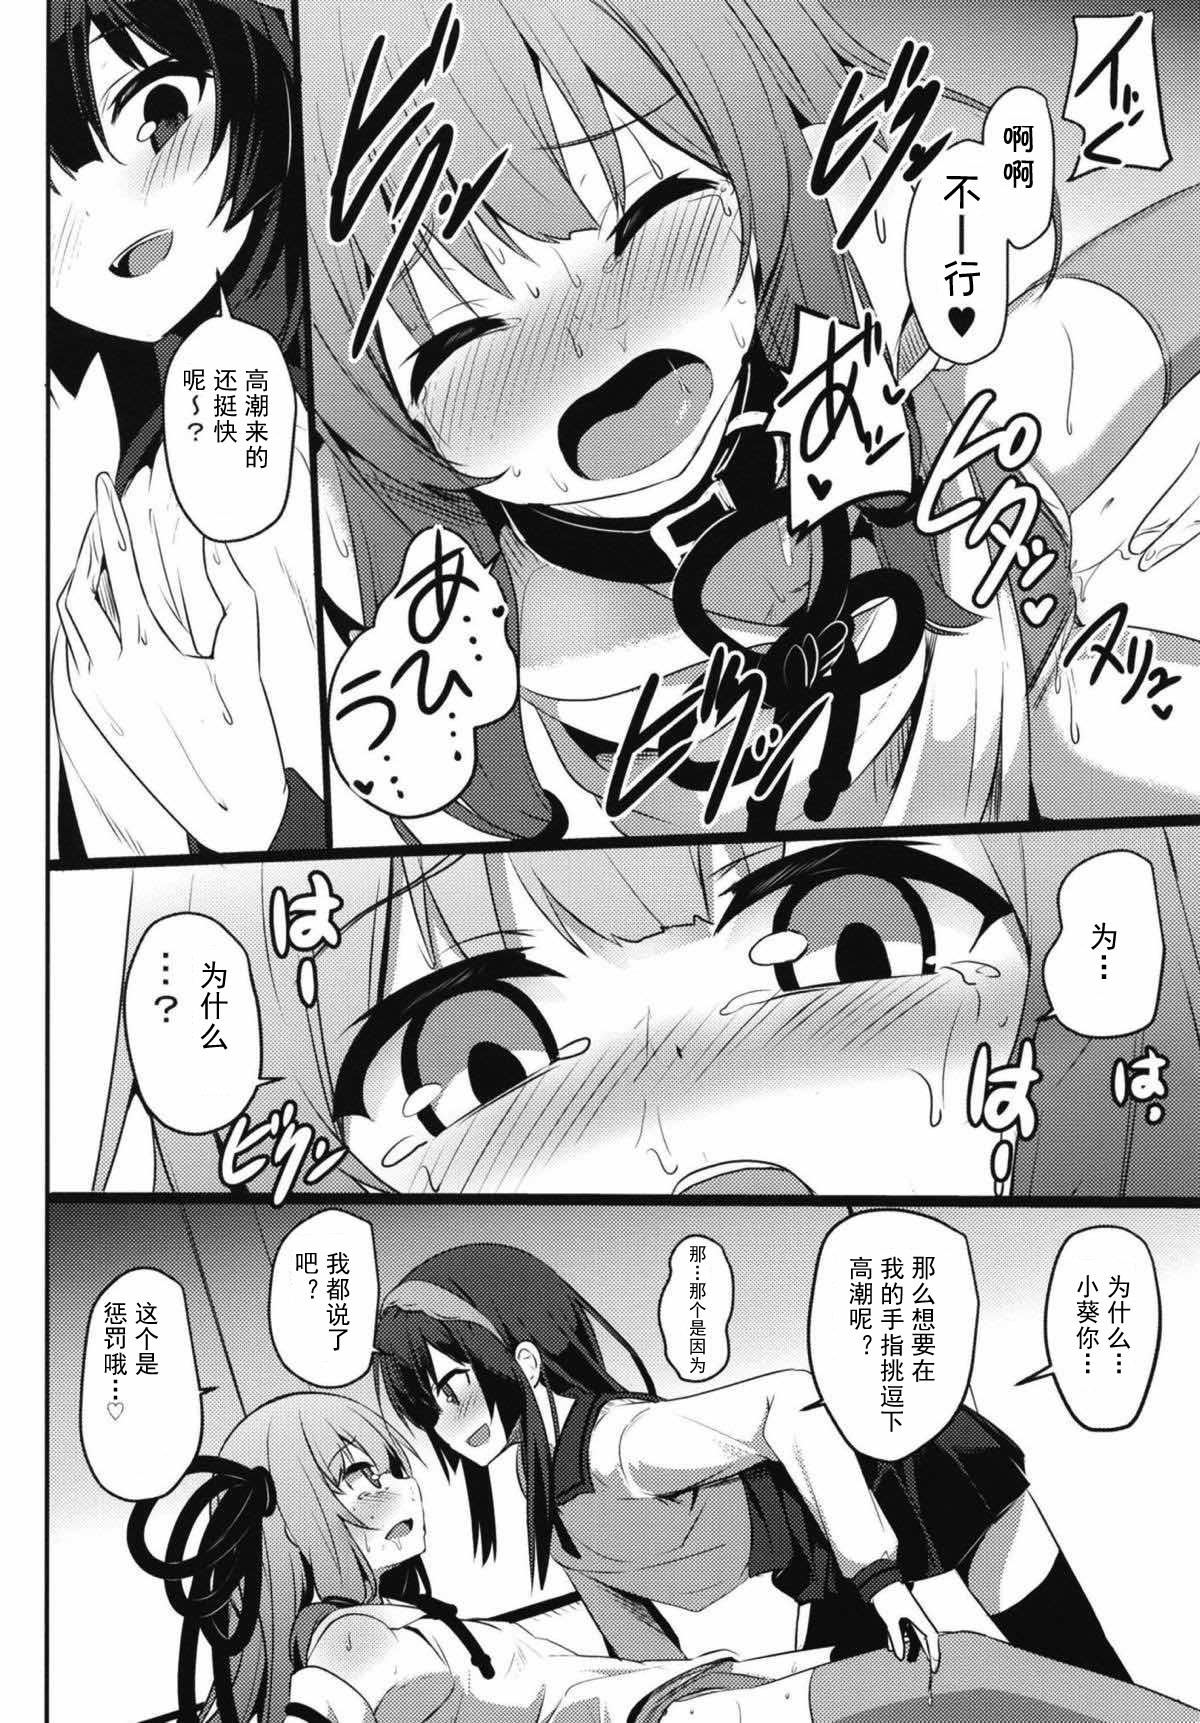 Trap (Kotonoha's Festa 2) [Milk Pudding (Jamcy)] Akane-chan Challenge! 2.5-kaime (VOICEROID) [Chinese] [古早个人汉化] - Voiceroid Chubby - Page 10